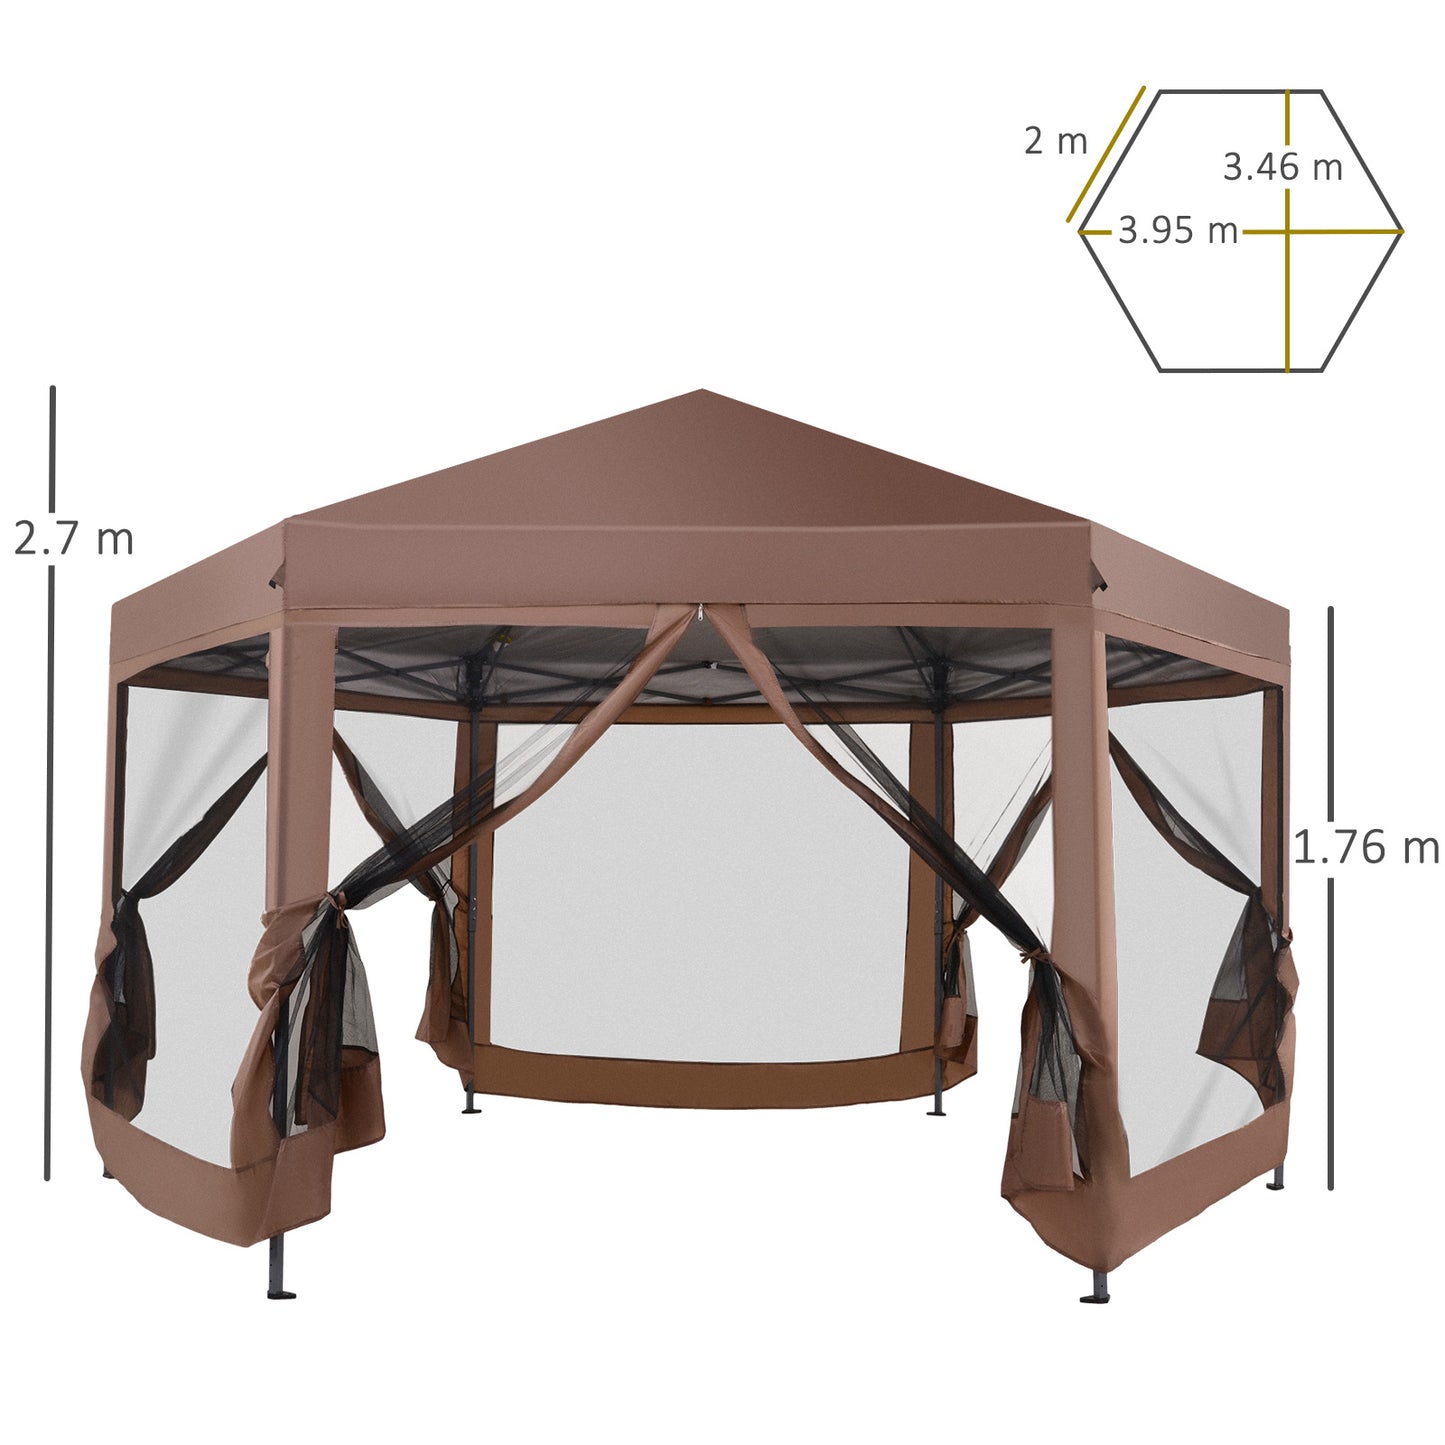 Outsunny Hexagonal Garden Gazebo Party Outdoor Canopy Tent Sun Shelter Adjustable with Mosquito Netting Zipped Door - Brown